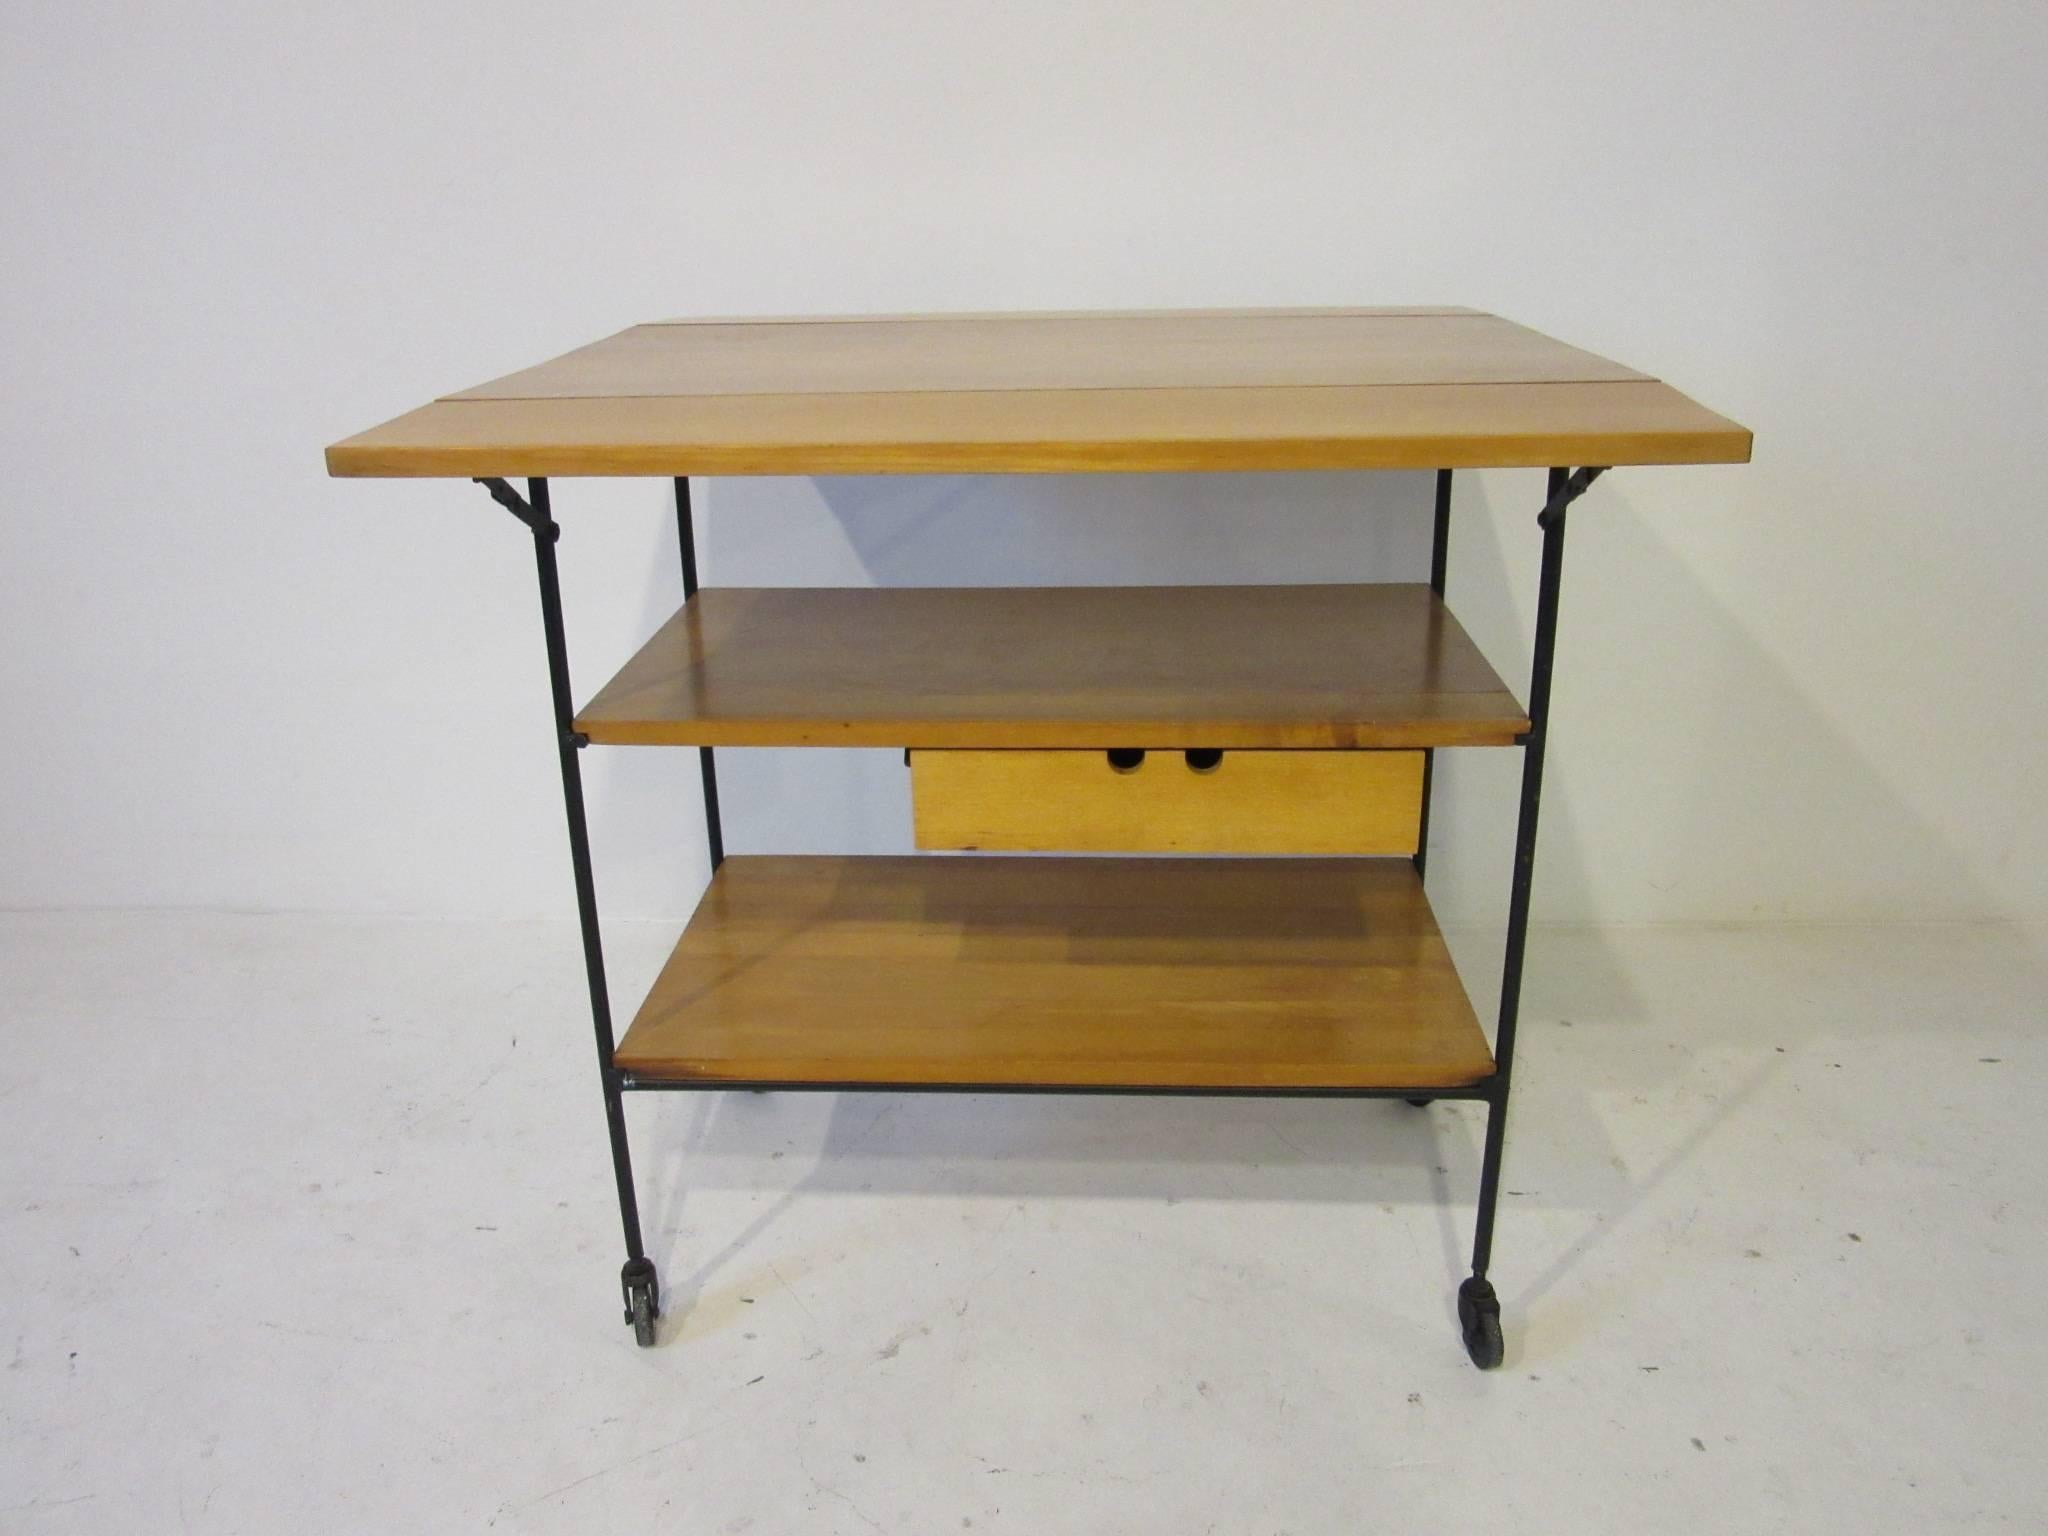 A maple wood bar or serving cart with two folding end pieces making a larger surface a small pull-out drawer on a satin black iron frame and wheels. From the planner group collection for the Winchendon furniture company. Total measurement for the